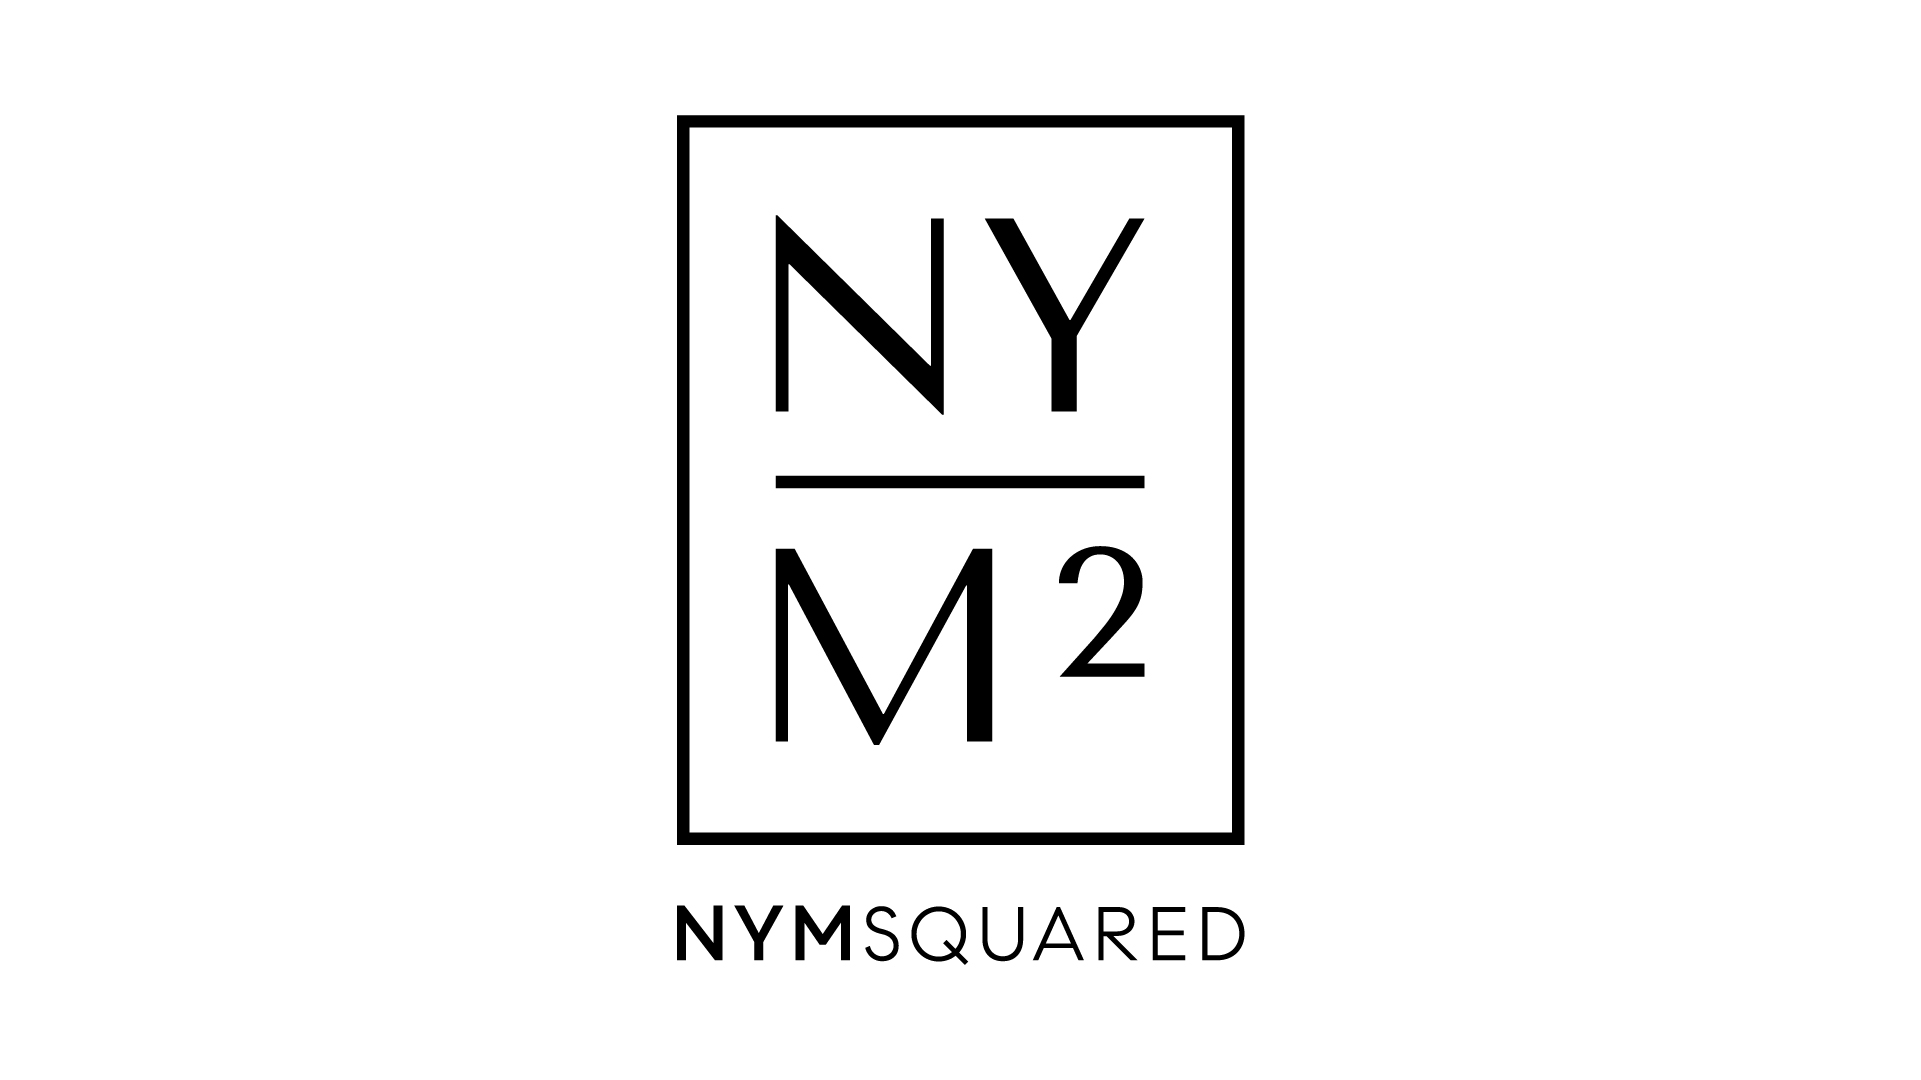 A text banner saying NYMSQUARED